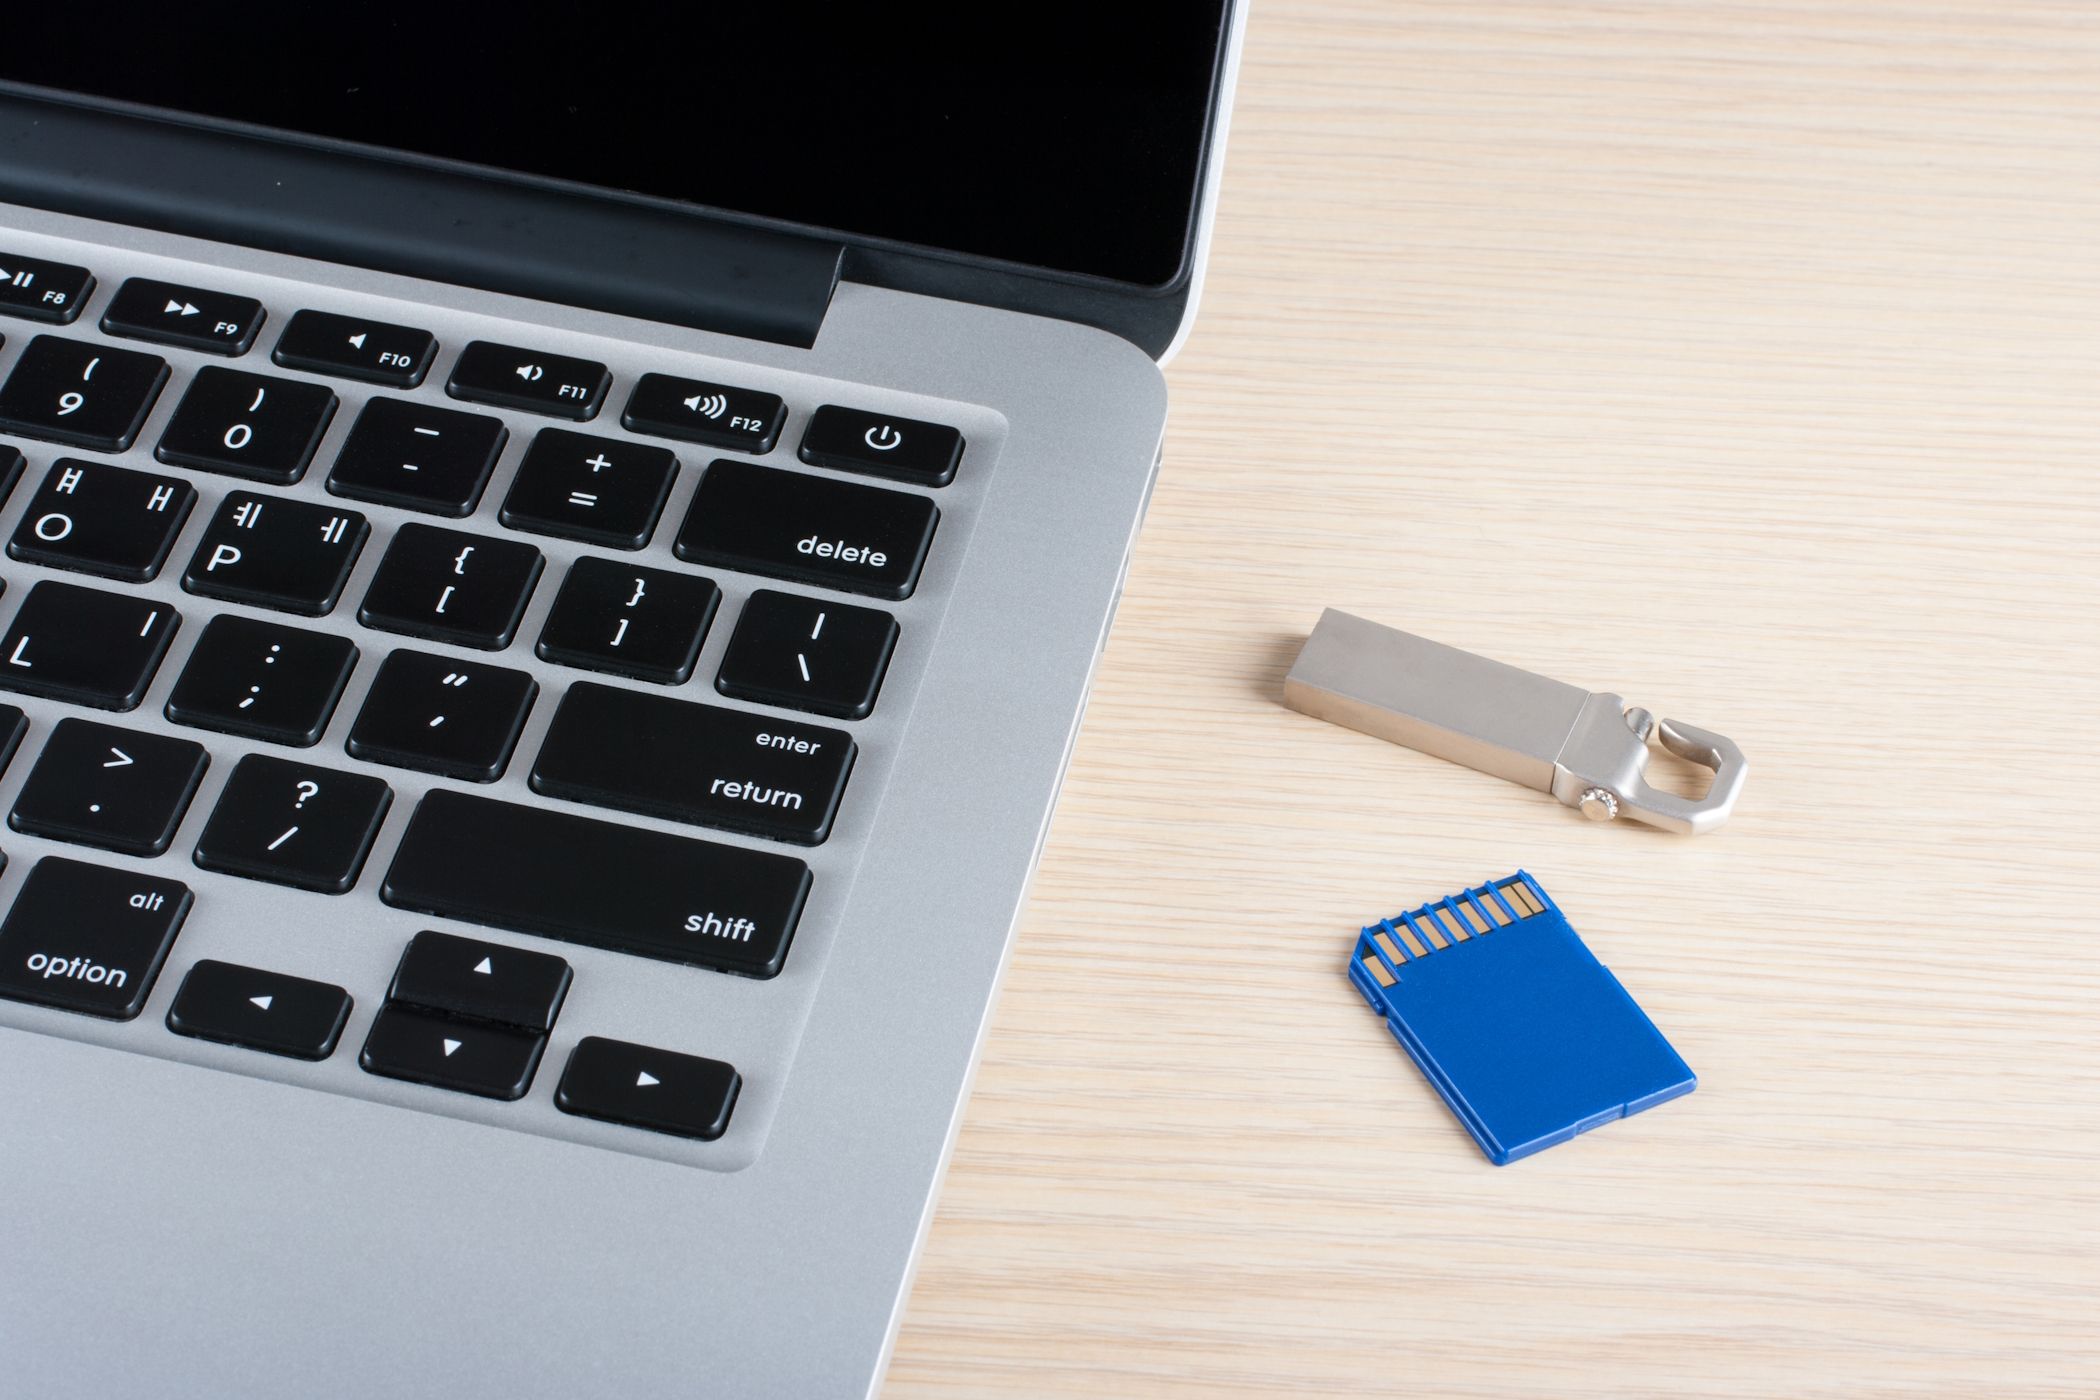 a MacBook next to a USB flash drive and an SD card on the desk